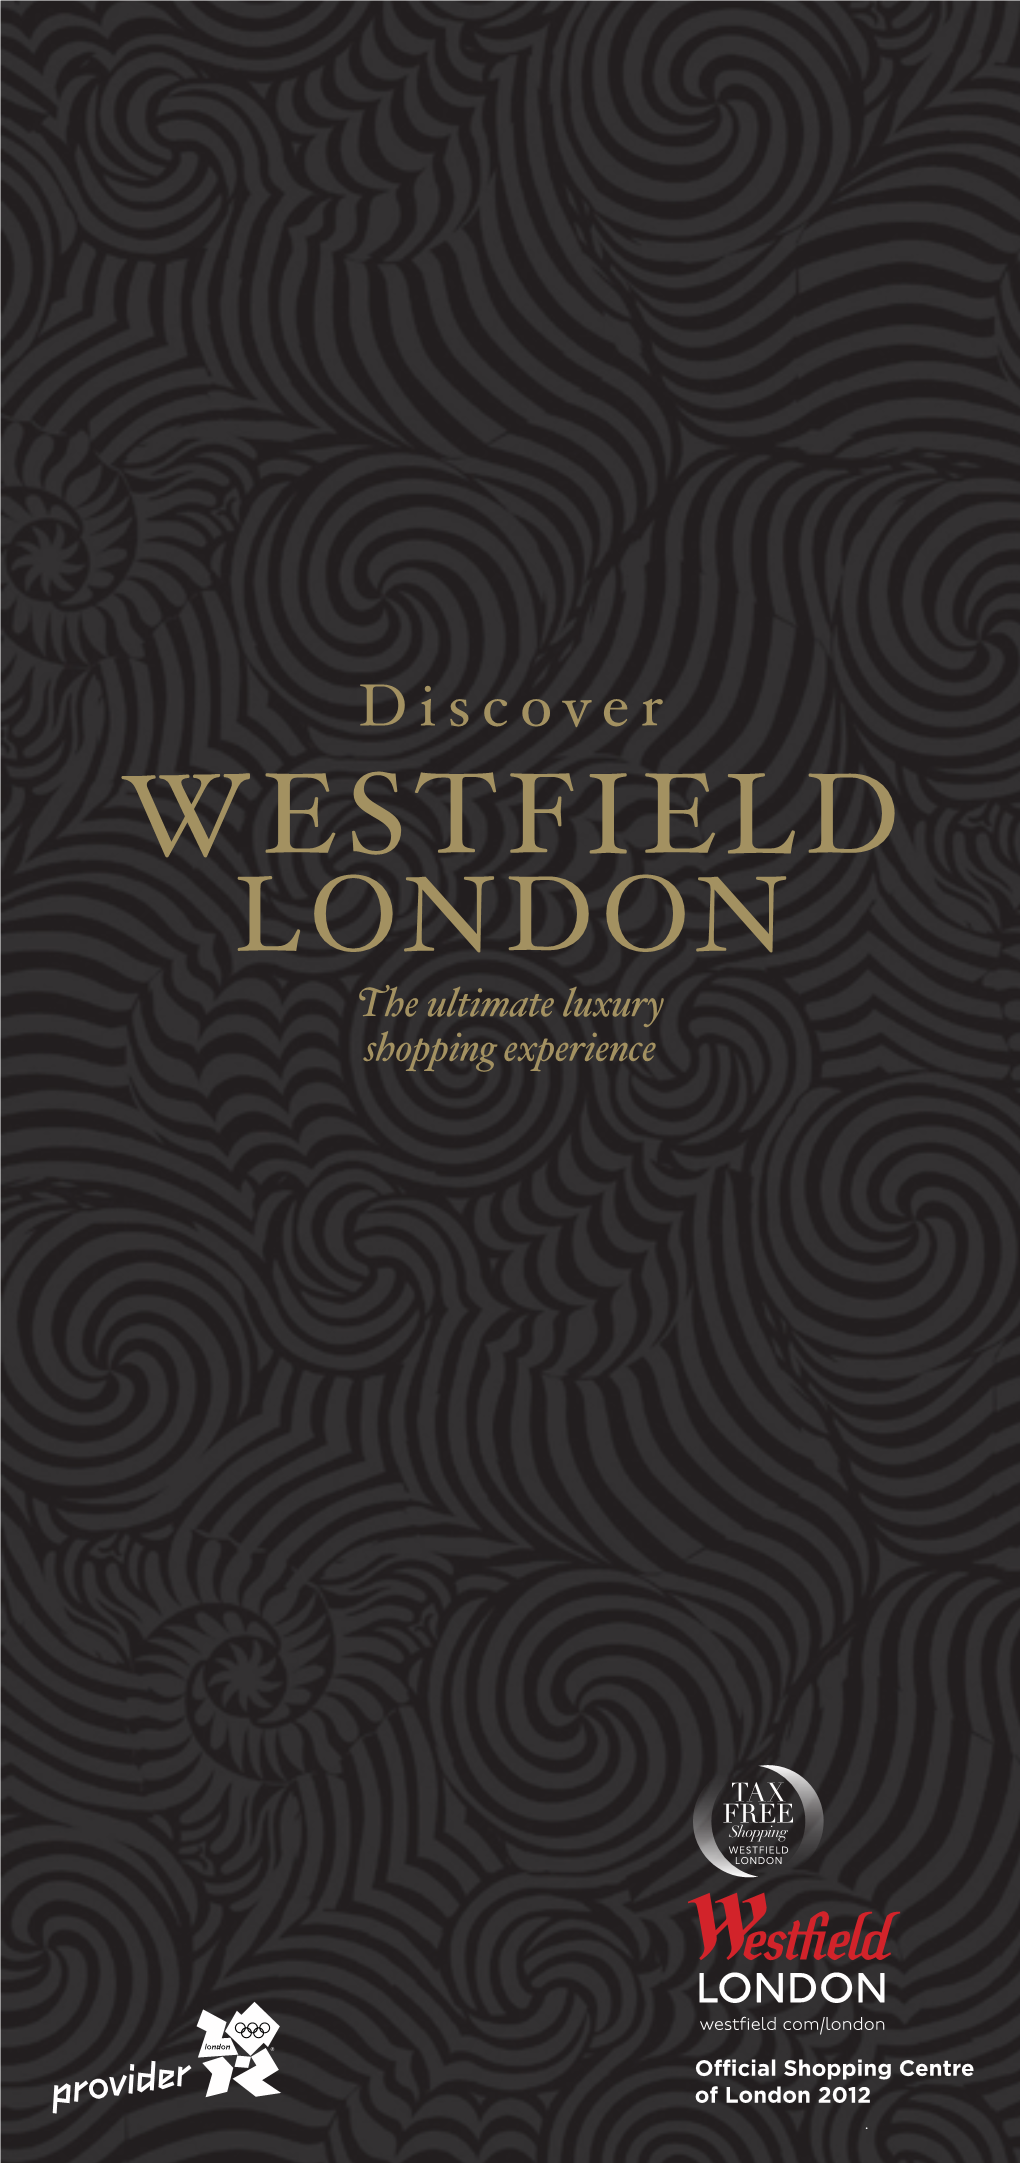 WESTFIELD LONDON the Ultimate Luxury Shopping Experience